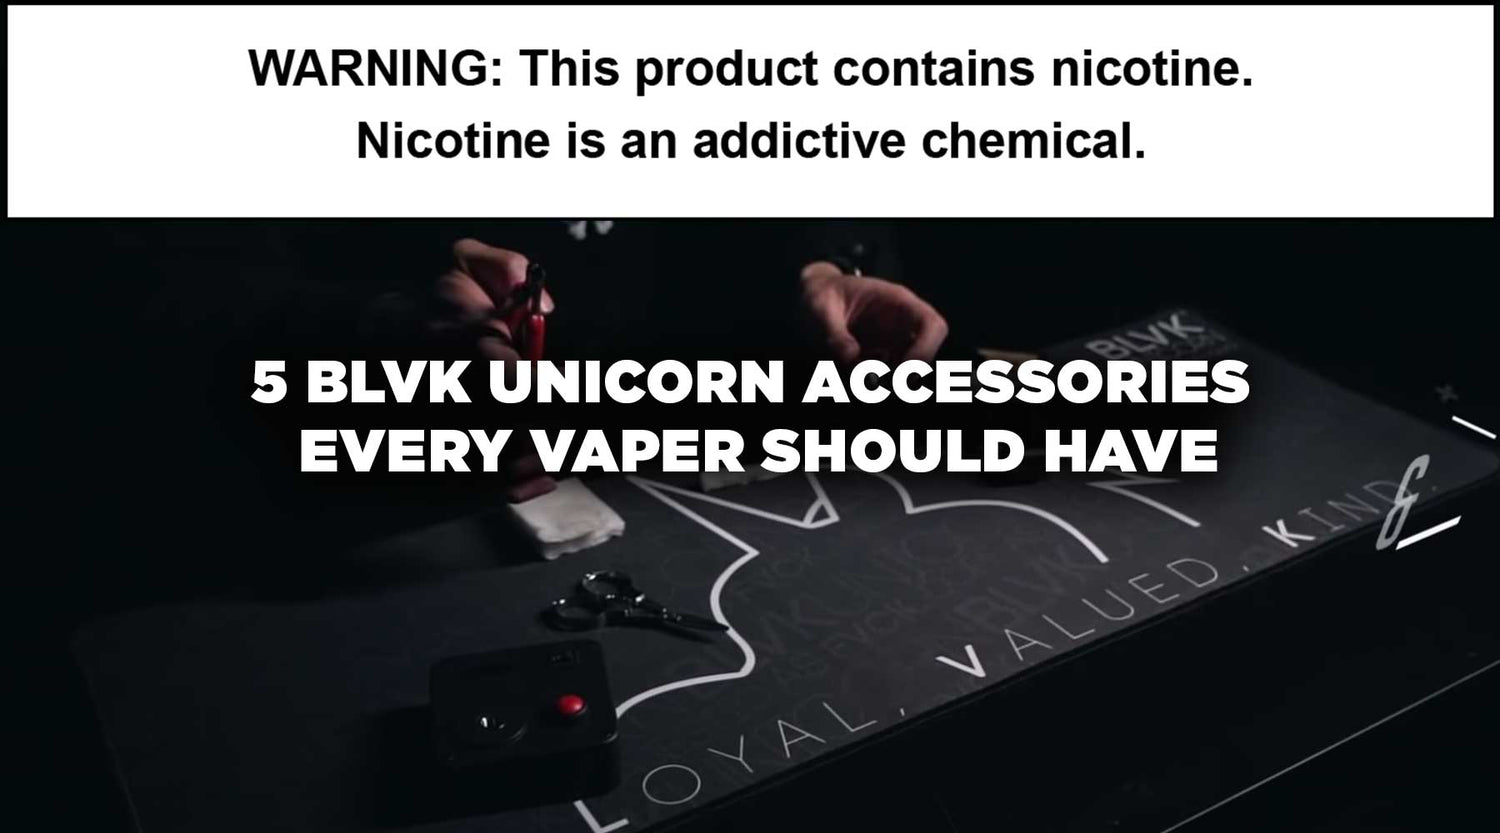 5 BLVK Unicorn Accessories Every Vaper Should Have